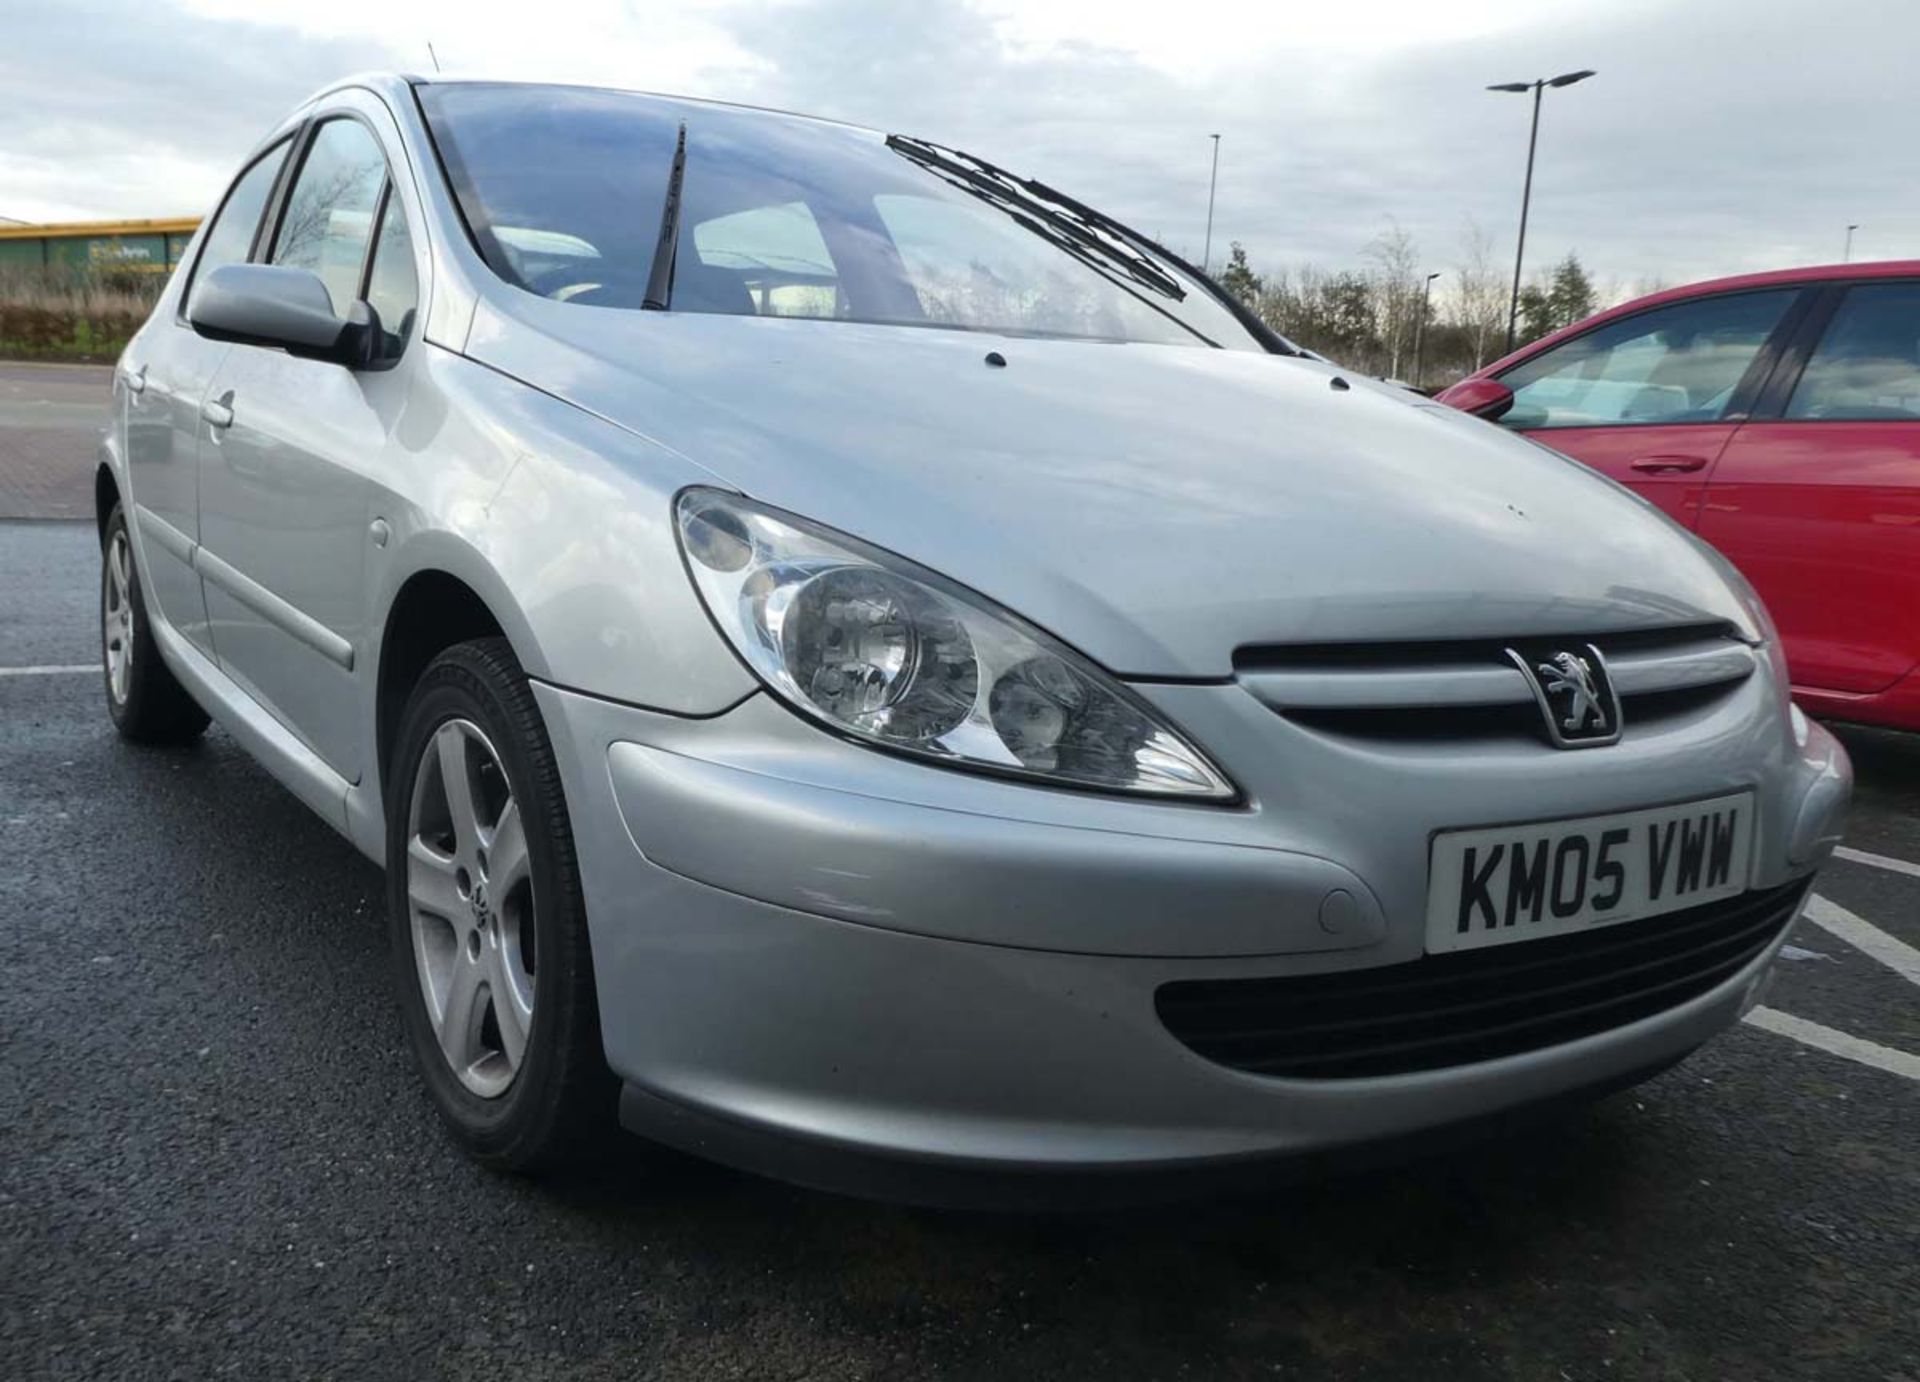 KM05 VWW (2005) Peugeot 307 in silver, 1560cc, diesel, 4 former keepers, 1 key, first registered - Image 2 of 10